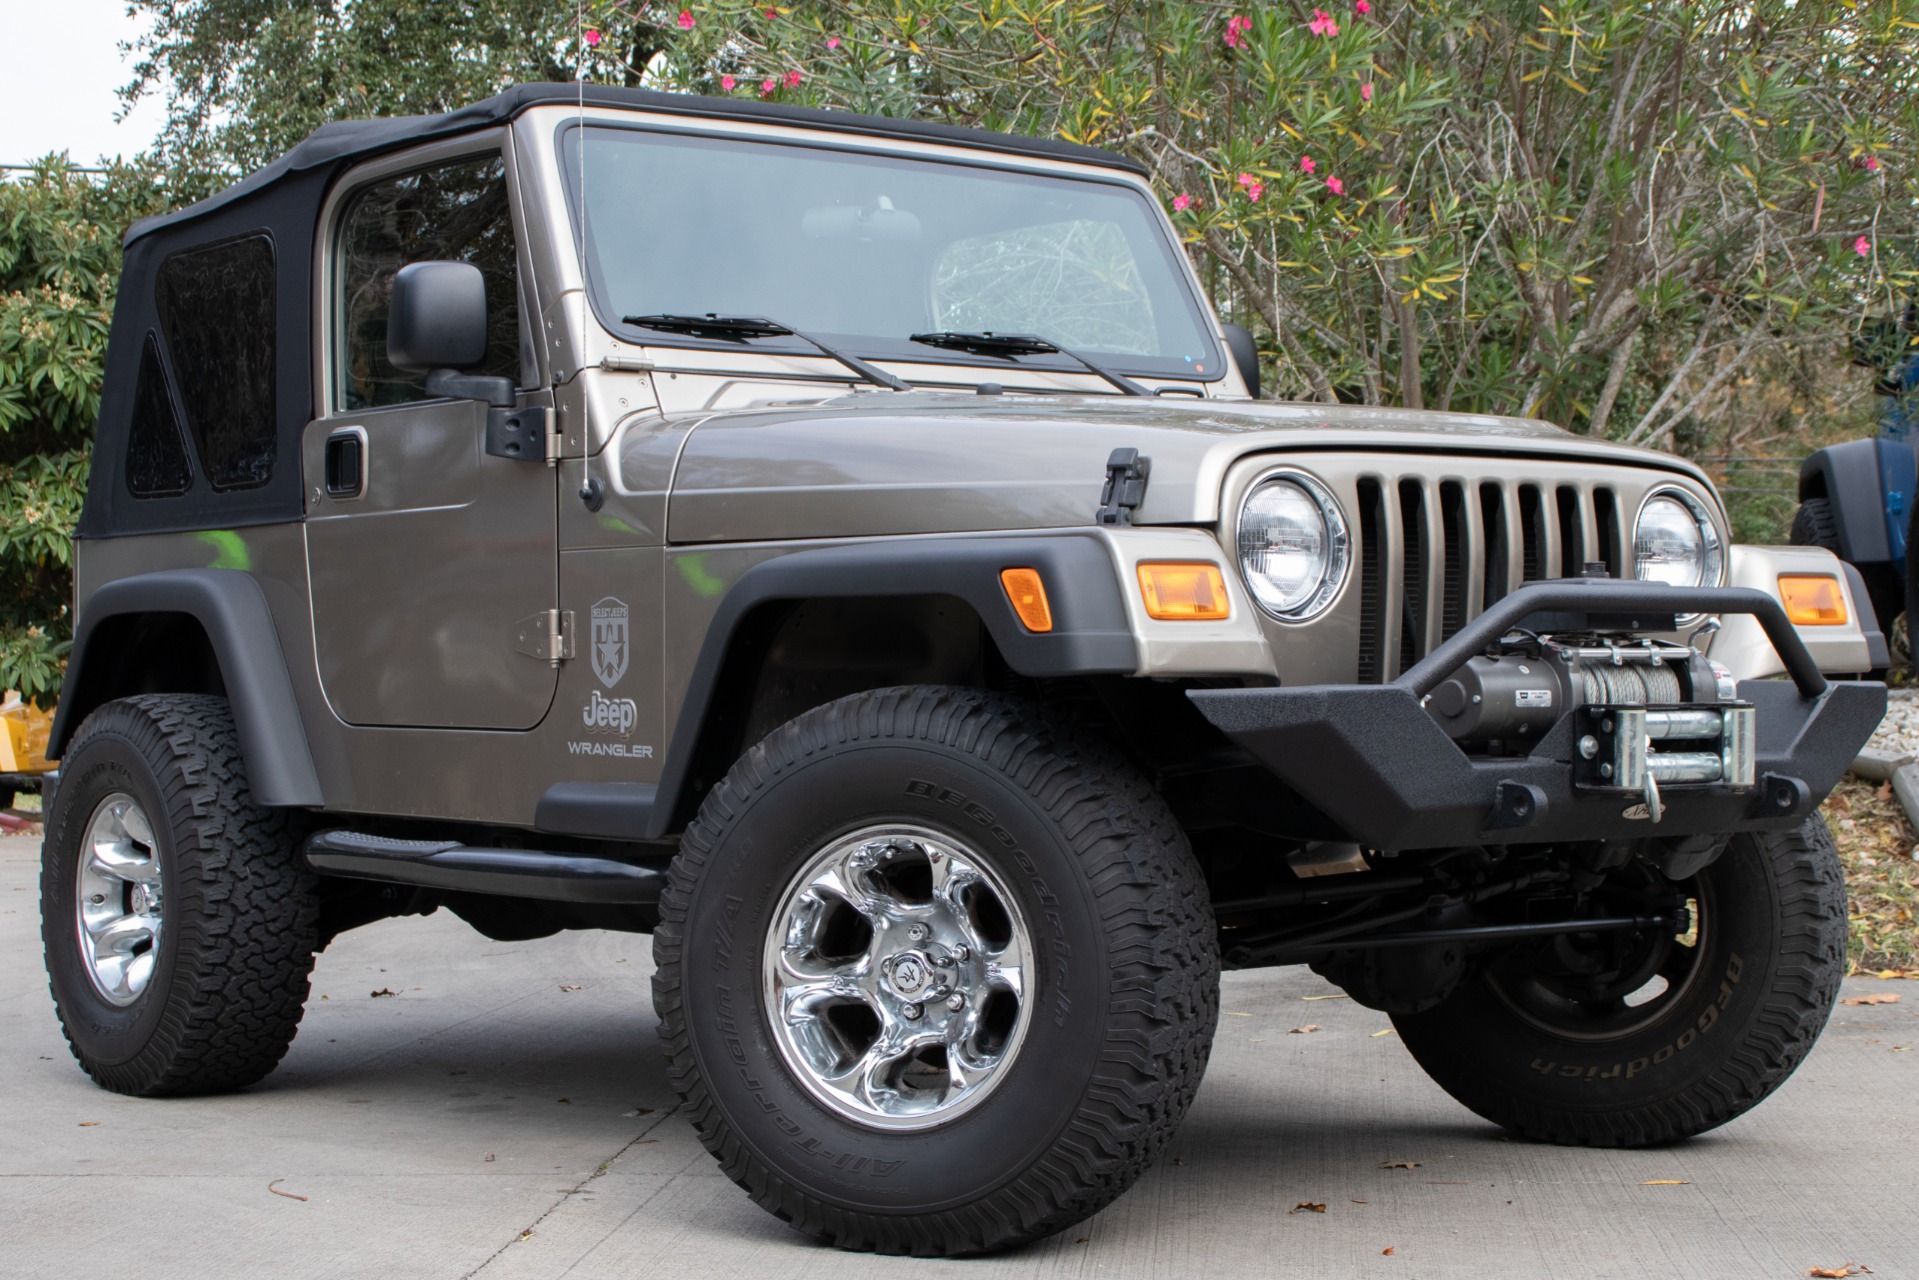 Used 2004 Jeep Wrangler X For Sale ($26,995) | Select Jeeps Inc. Stock  #746188